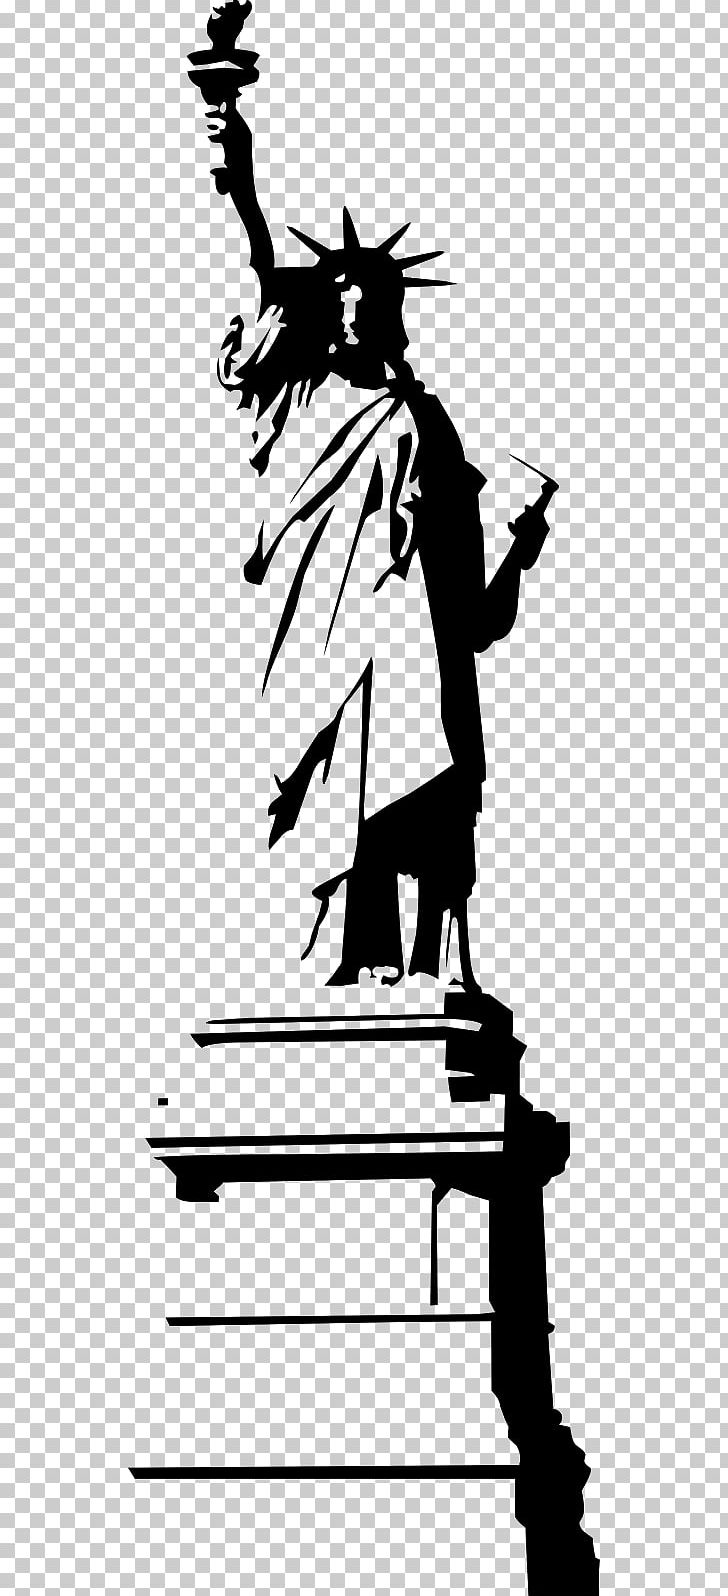 Statue Of Liberty Paris Sticker PNG, Clipart, Art, Artwork, Black, Black And White, Cartoon Free PNG Download